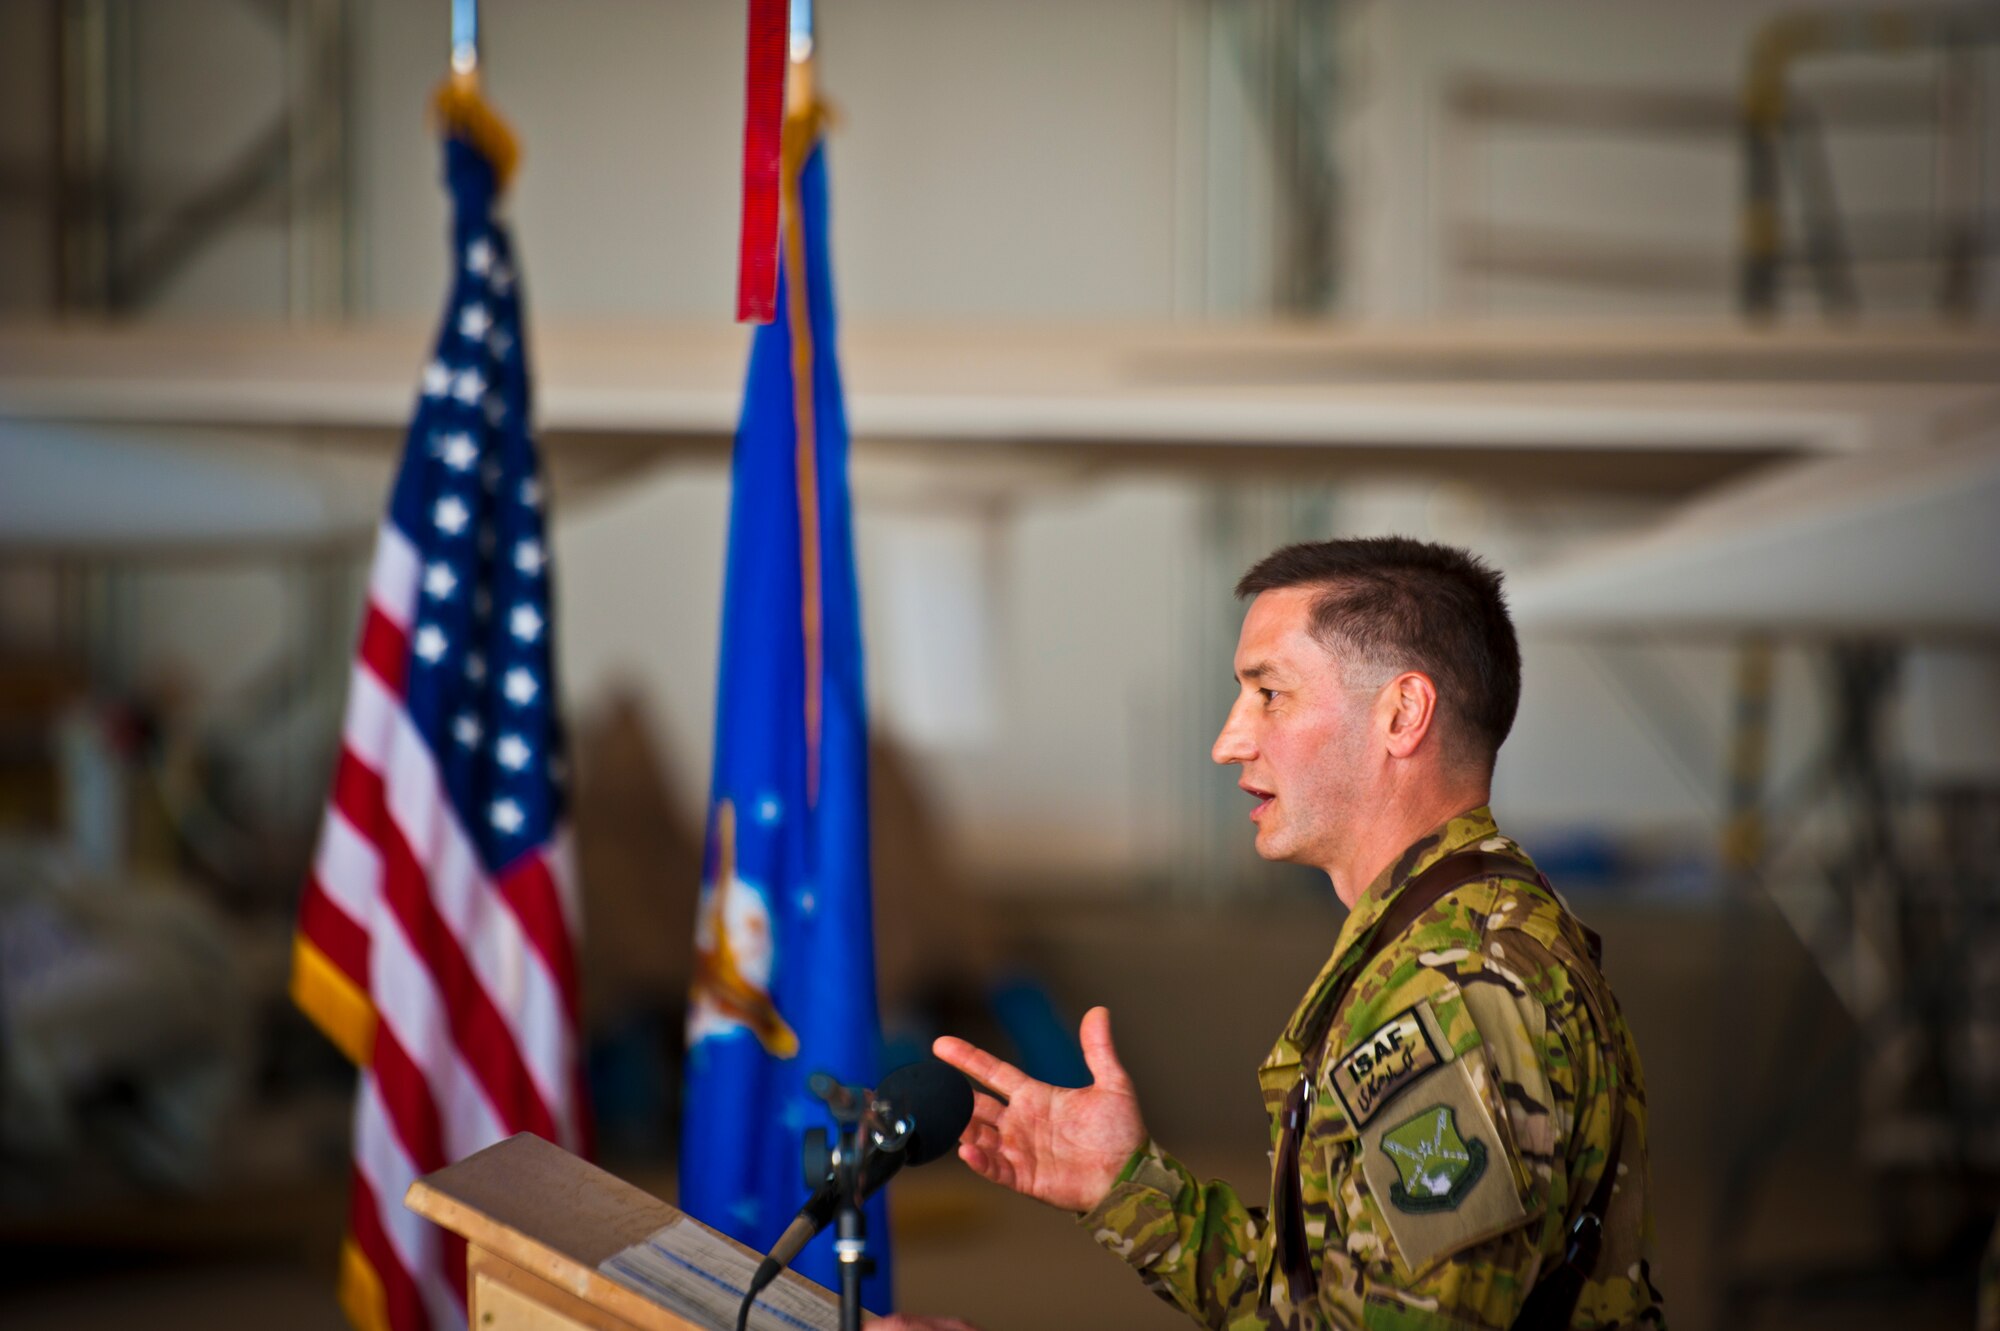 Lt. Col. Robert Finch, 430th Expeditionary Electronic Combat Squadron commander, speaks during an activation ceremony for the squadron at Kandahar Airfield, March 13, 2013. The unit, which flies the E-11A, was previously designated as the 451st Tactical Airborne Gateway. “This deployment is a great opportunity for these warriors to serve their country, and being deployed here during the time this unit converts to a squadron makes it extra special,” he said. (U.S. Air Force photo/Senior Airman Scott Saldukas)